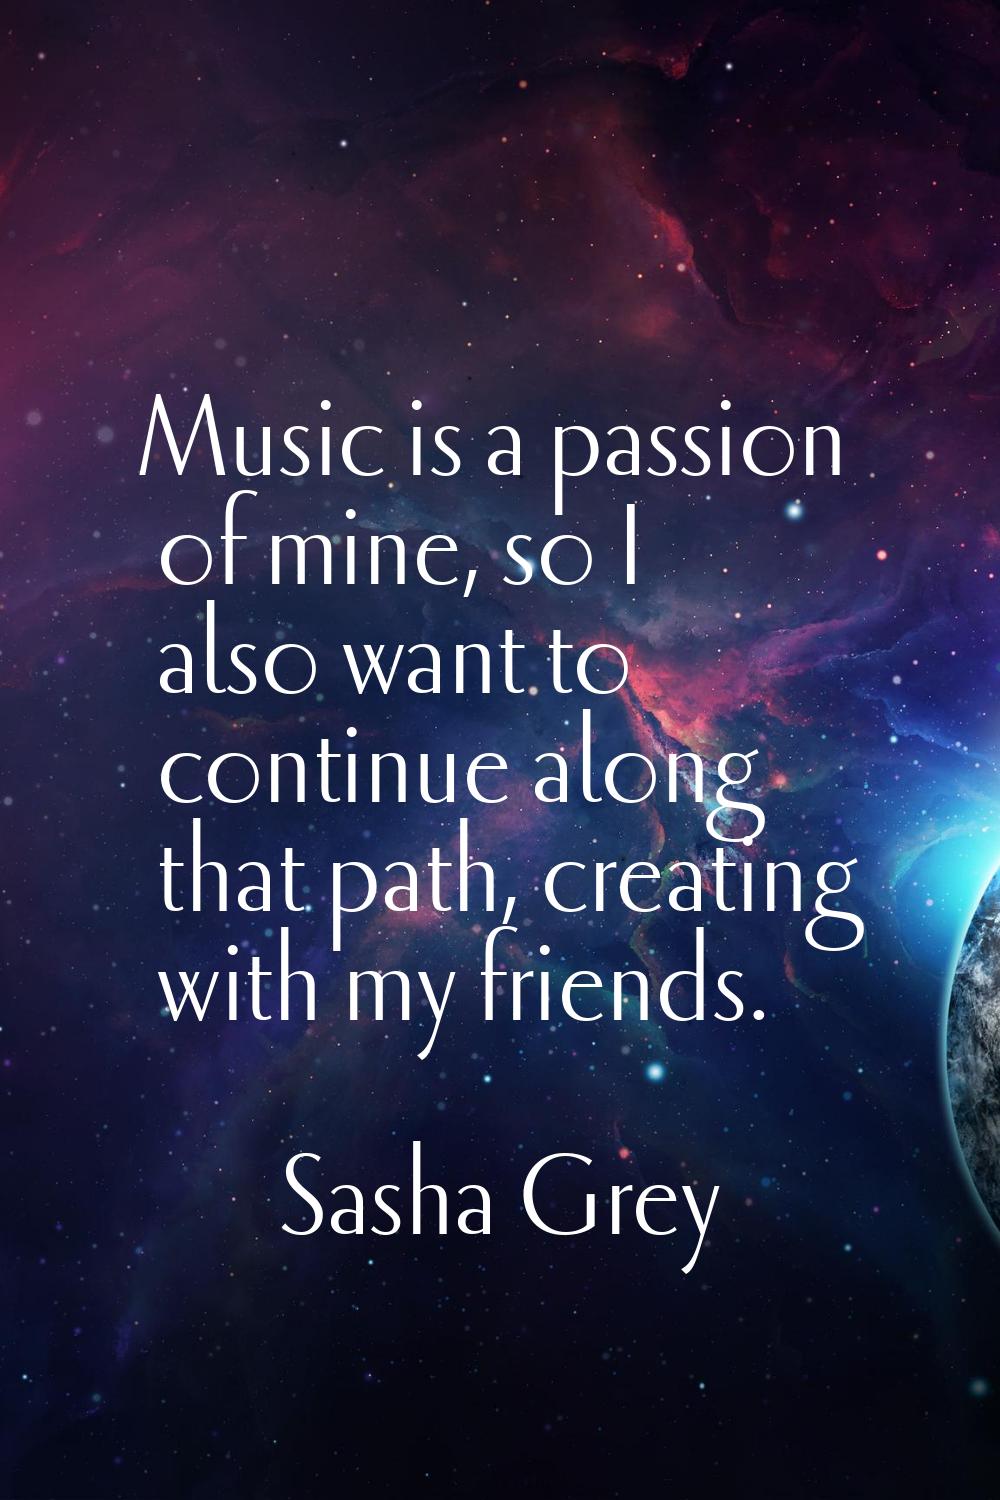 Music is a passion of mine, so I also want to continue along that path, creating with my friends.